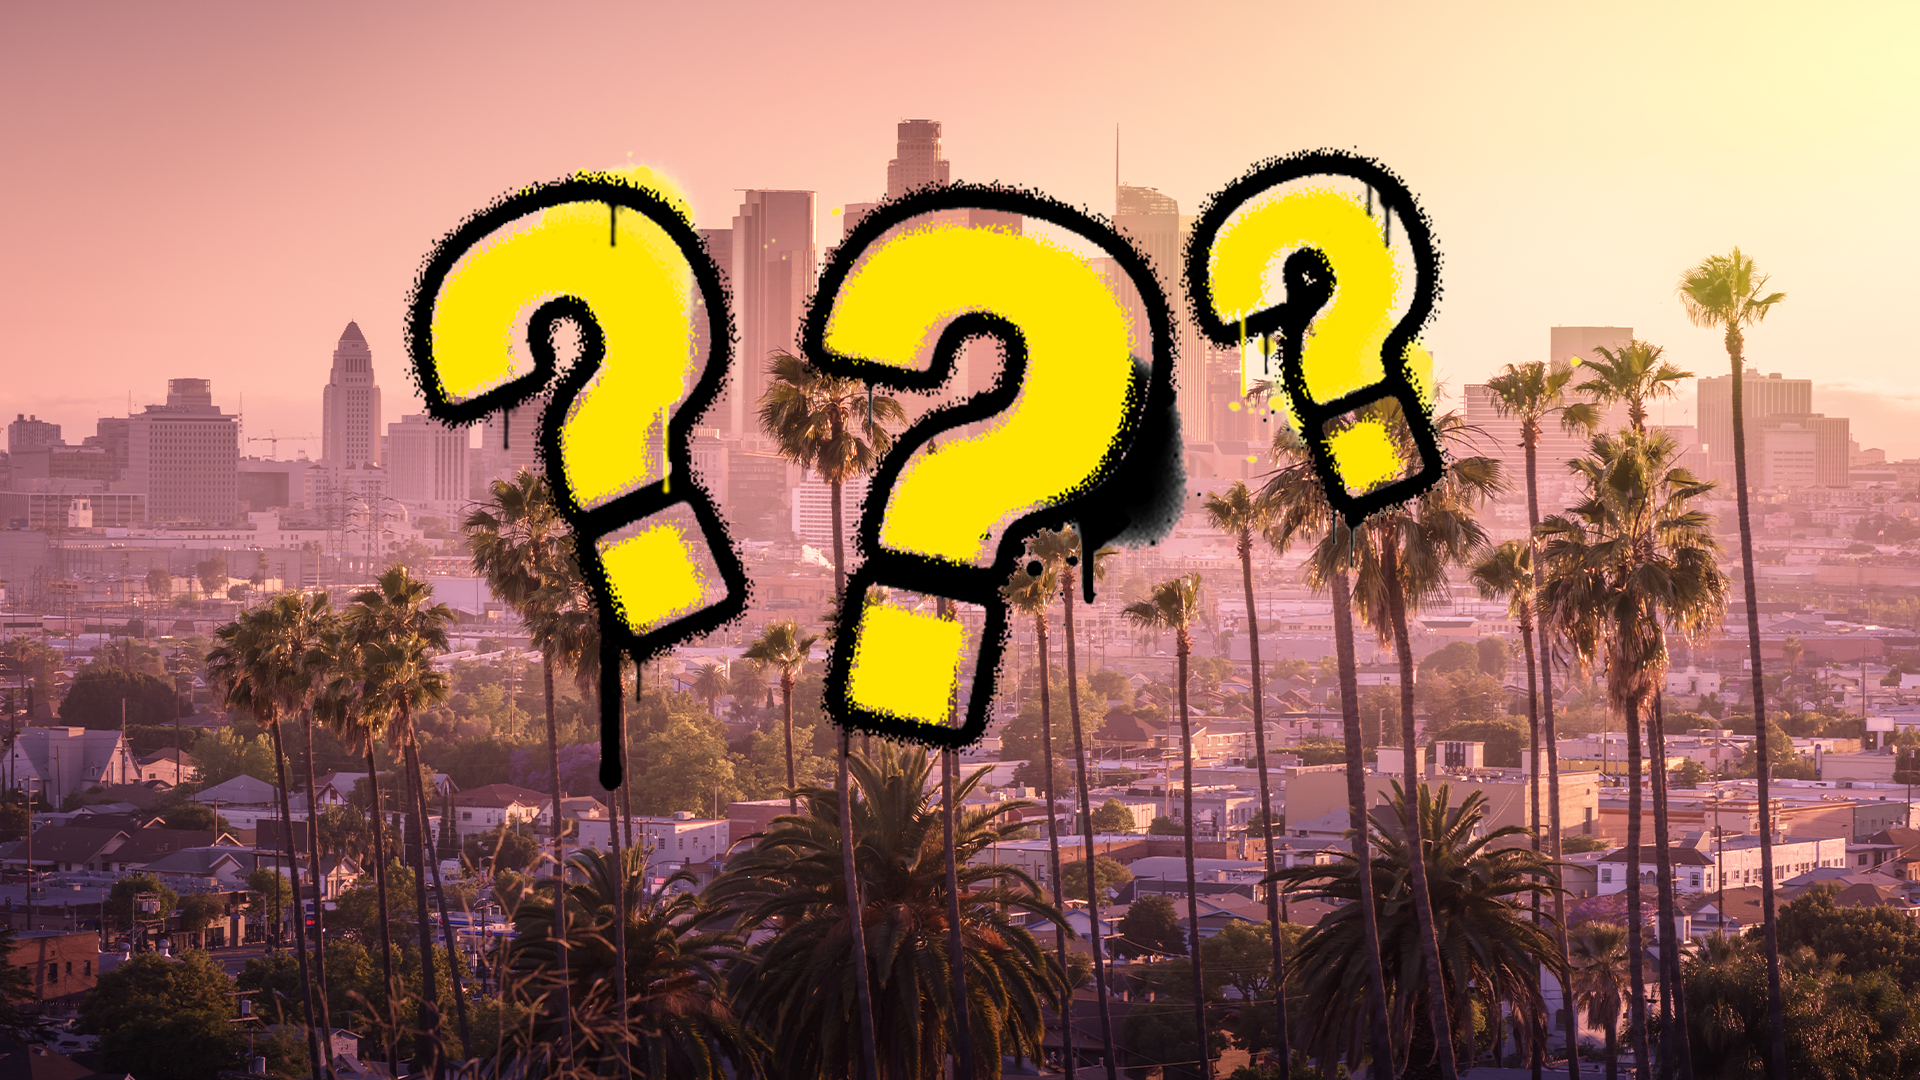 Los Angeles and question marks